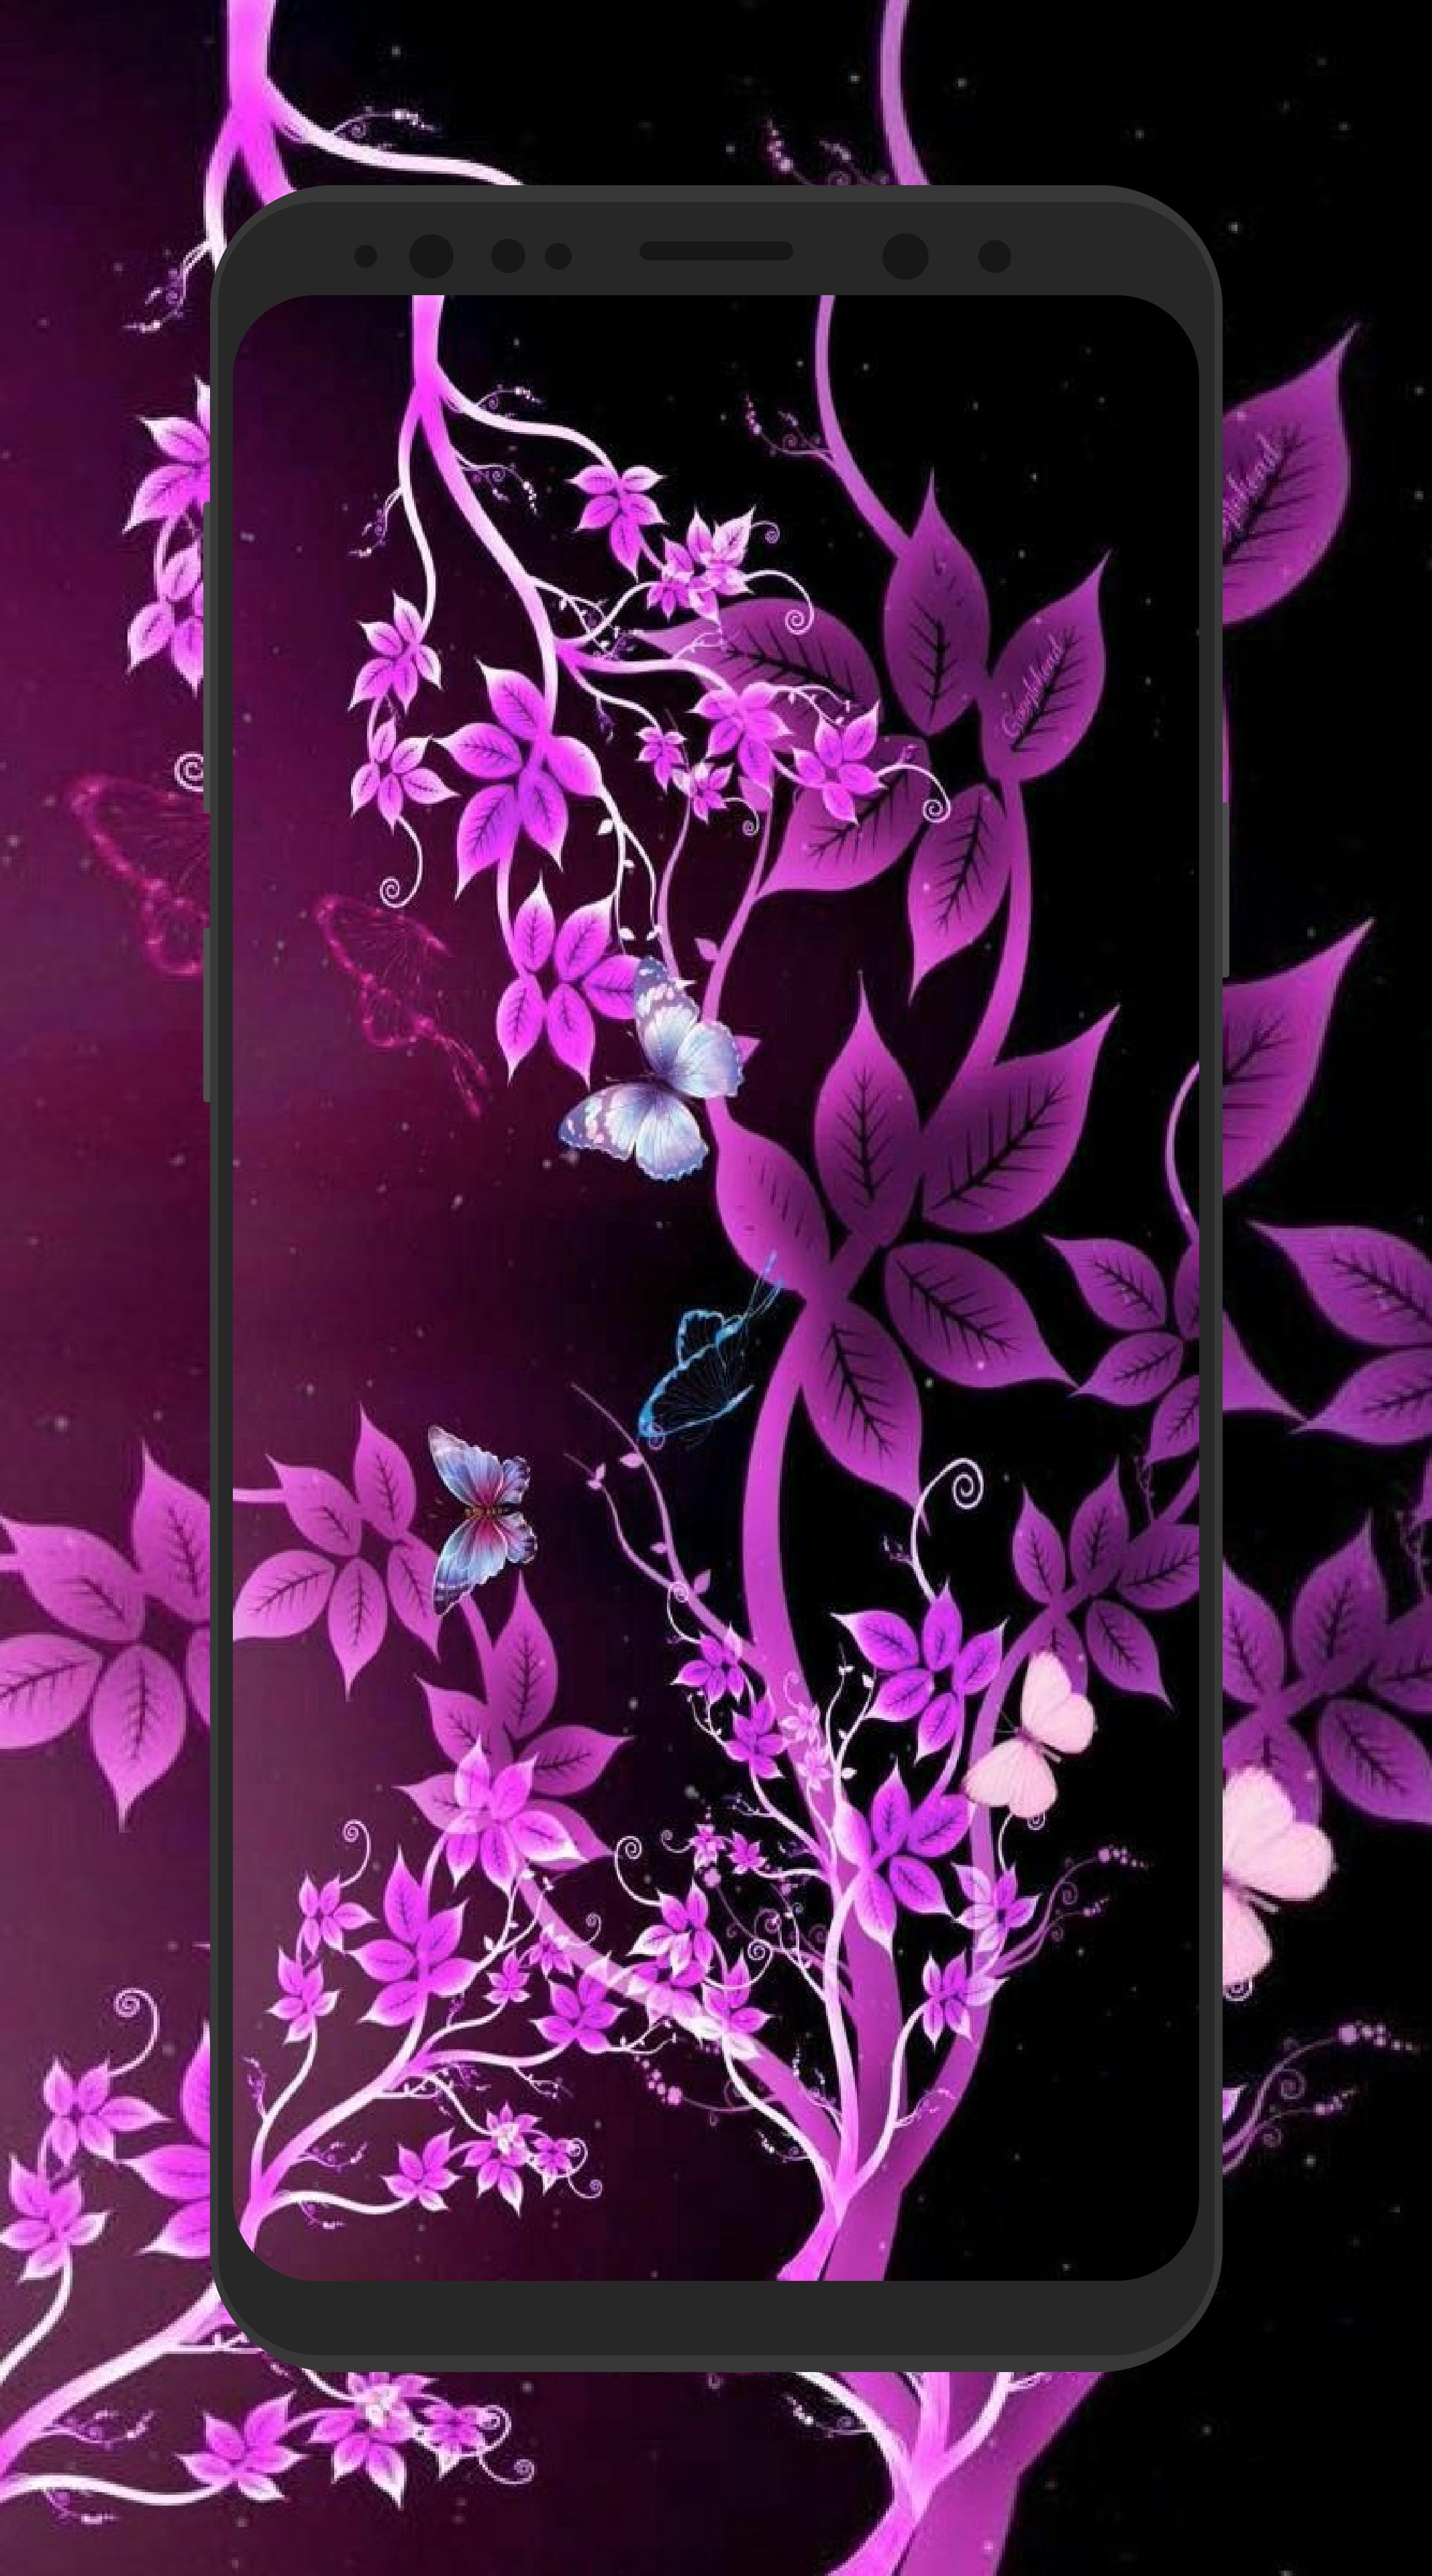 Glowing Flowers Wallpaper 2020 for Android